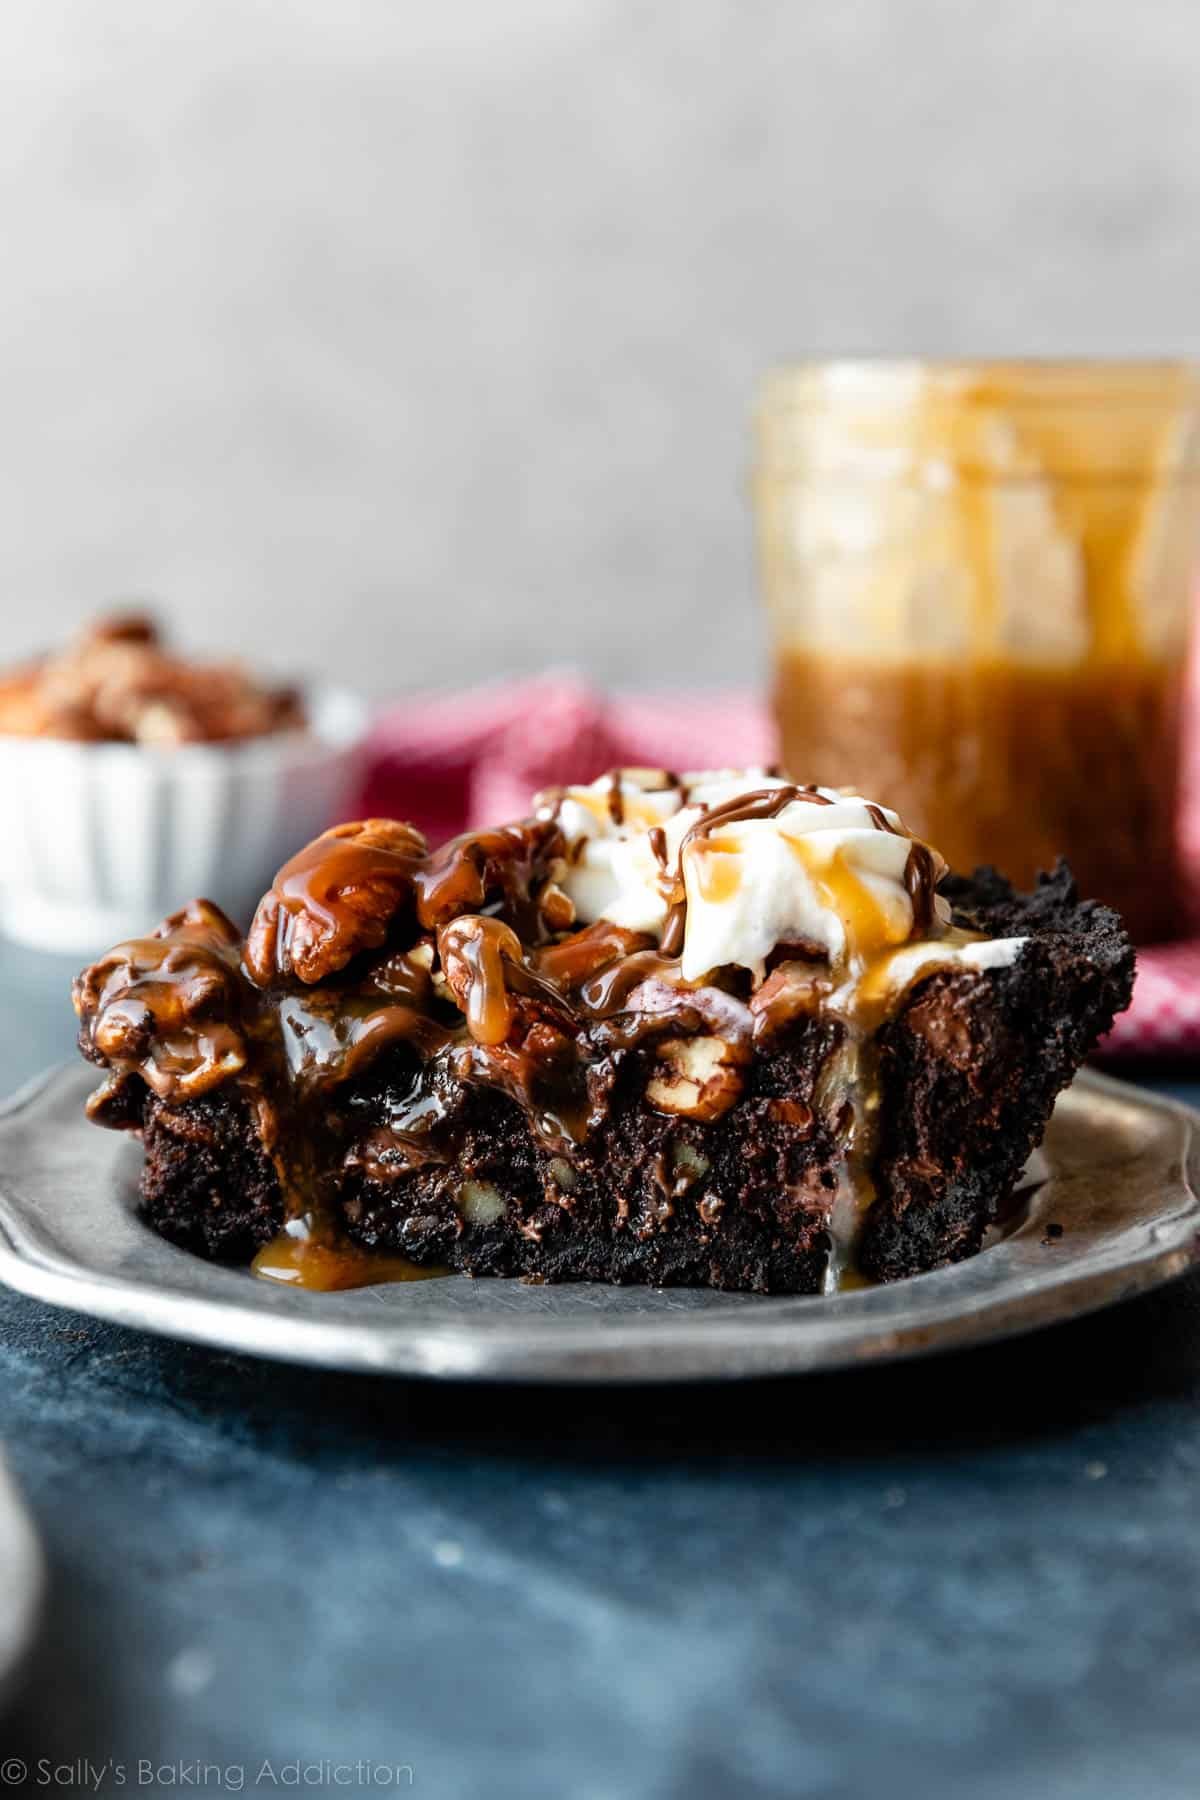 slice of brownie pie with pecans, caramel, and whipped cream on top on a silver plate with jar of caramel in the background.